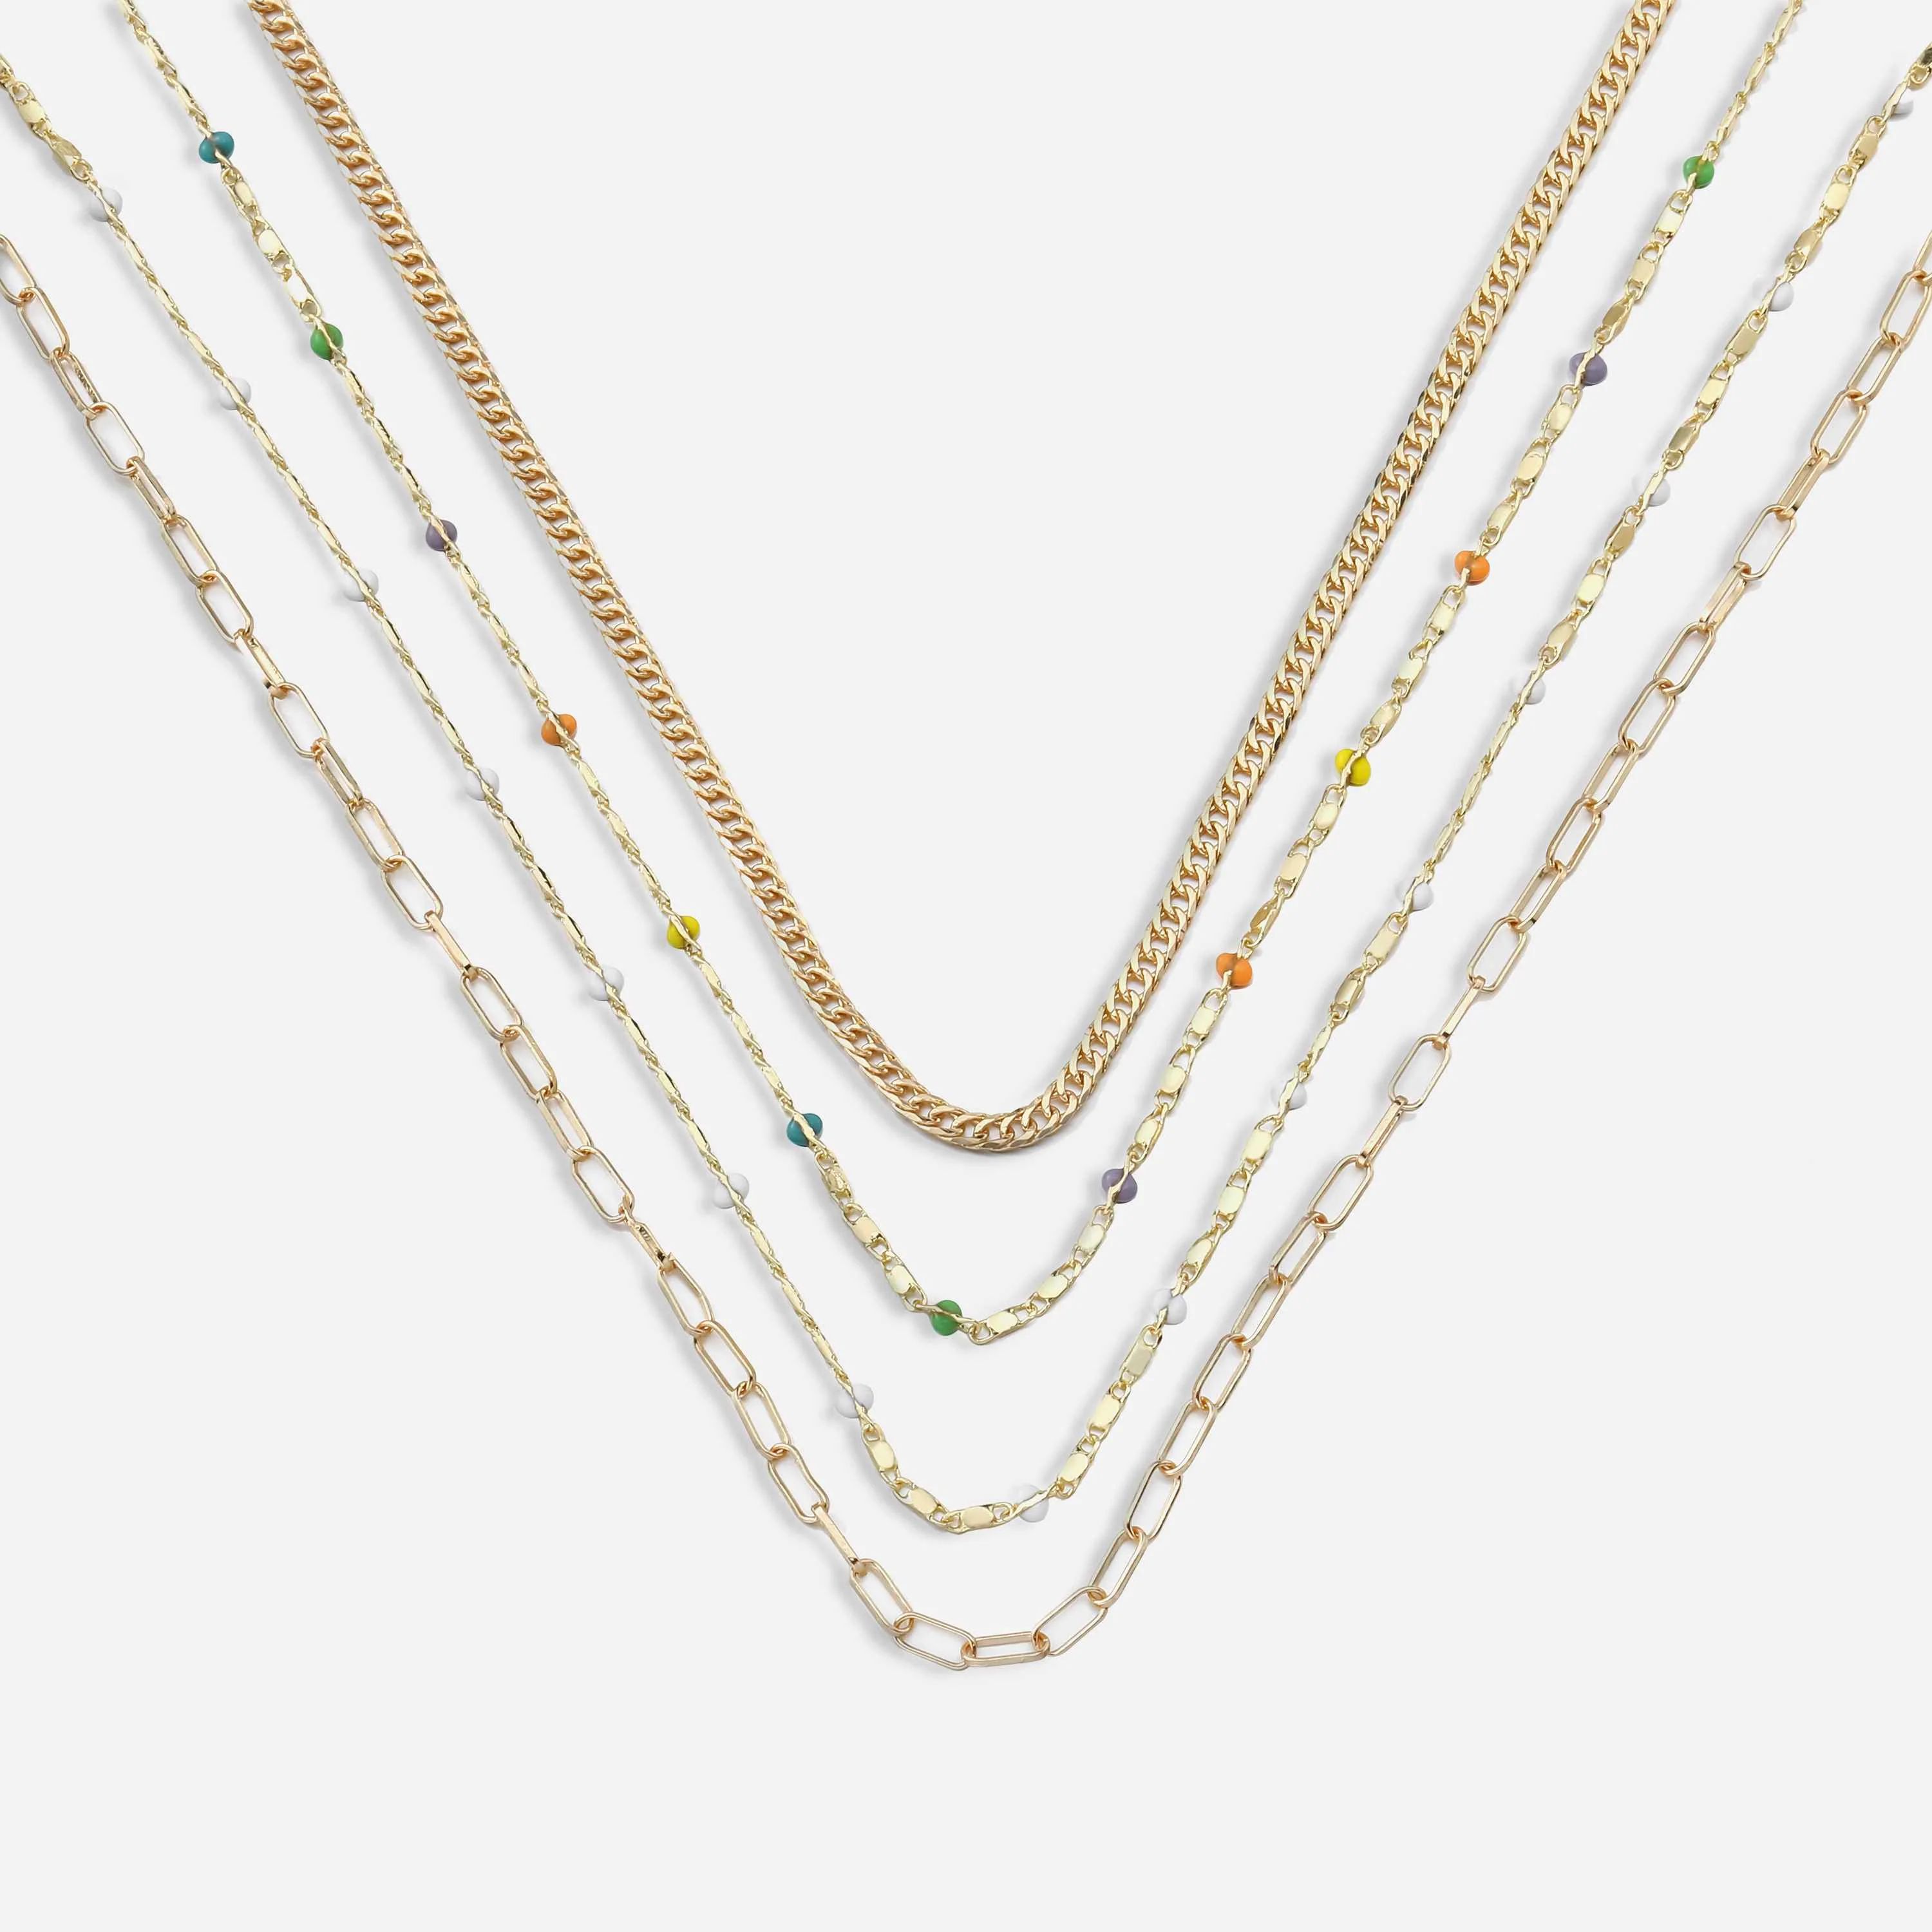 Kaylee Layered Necklace | Victoria Emerson